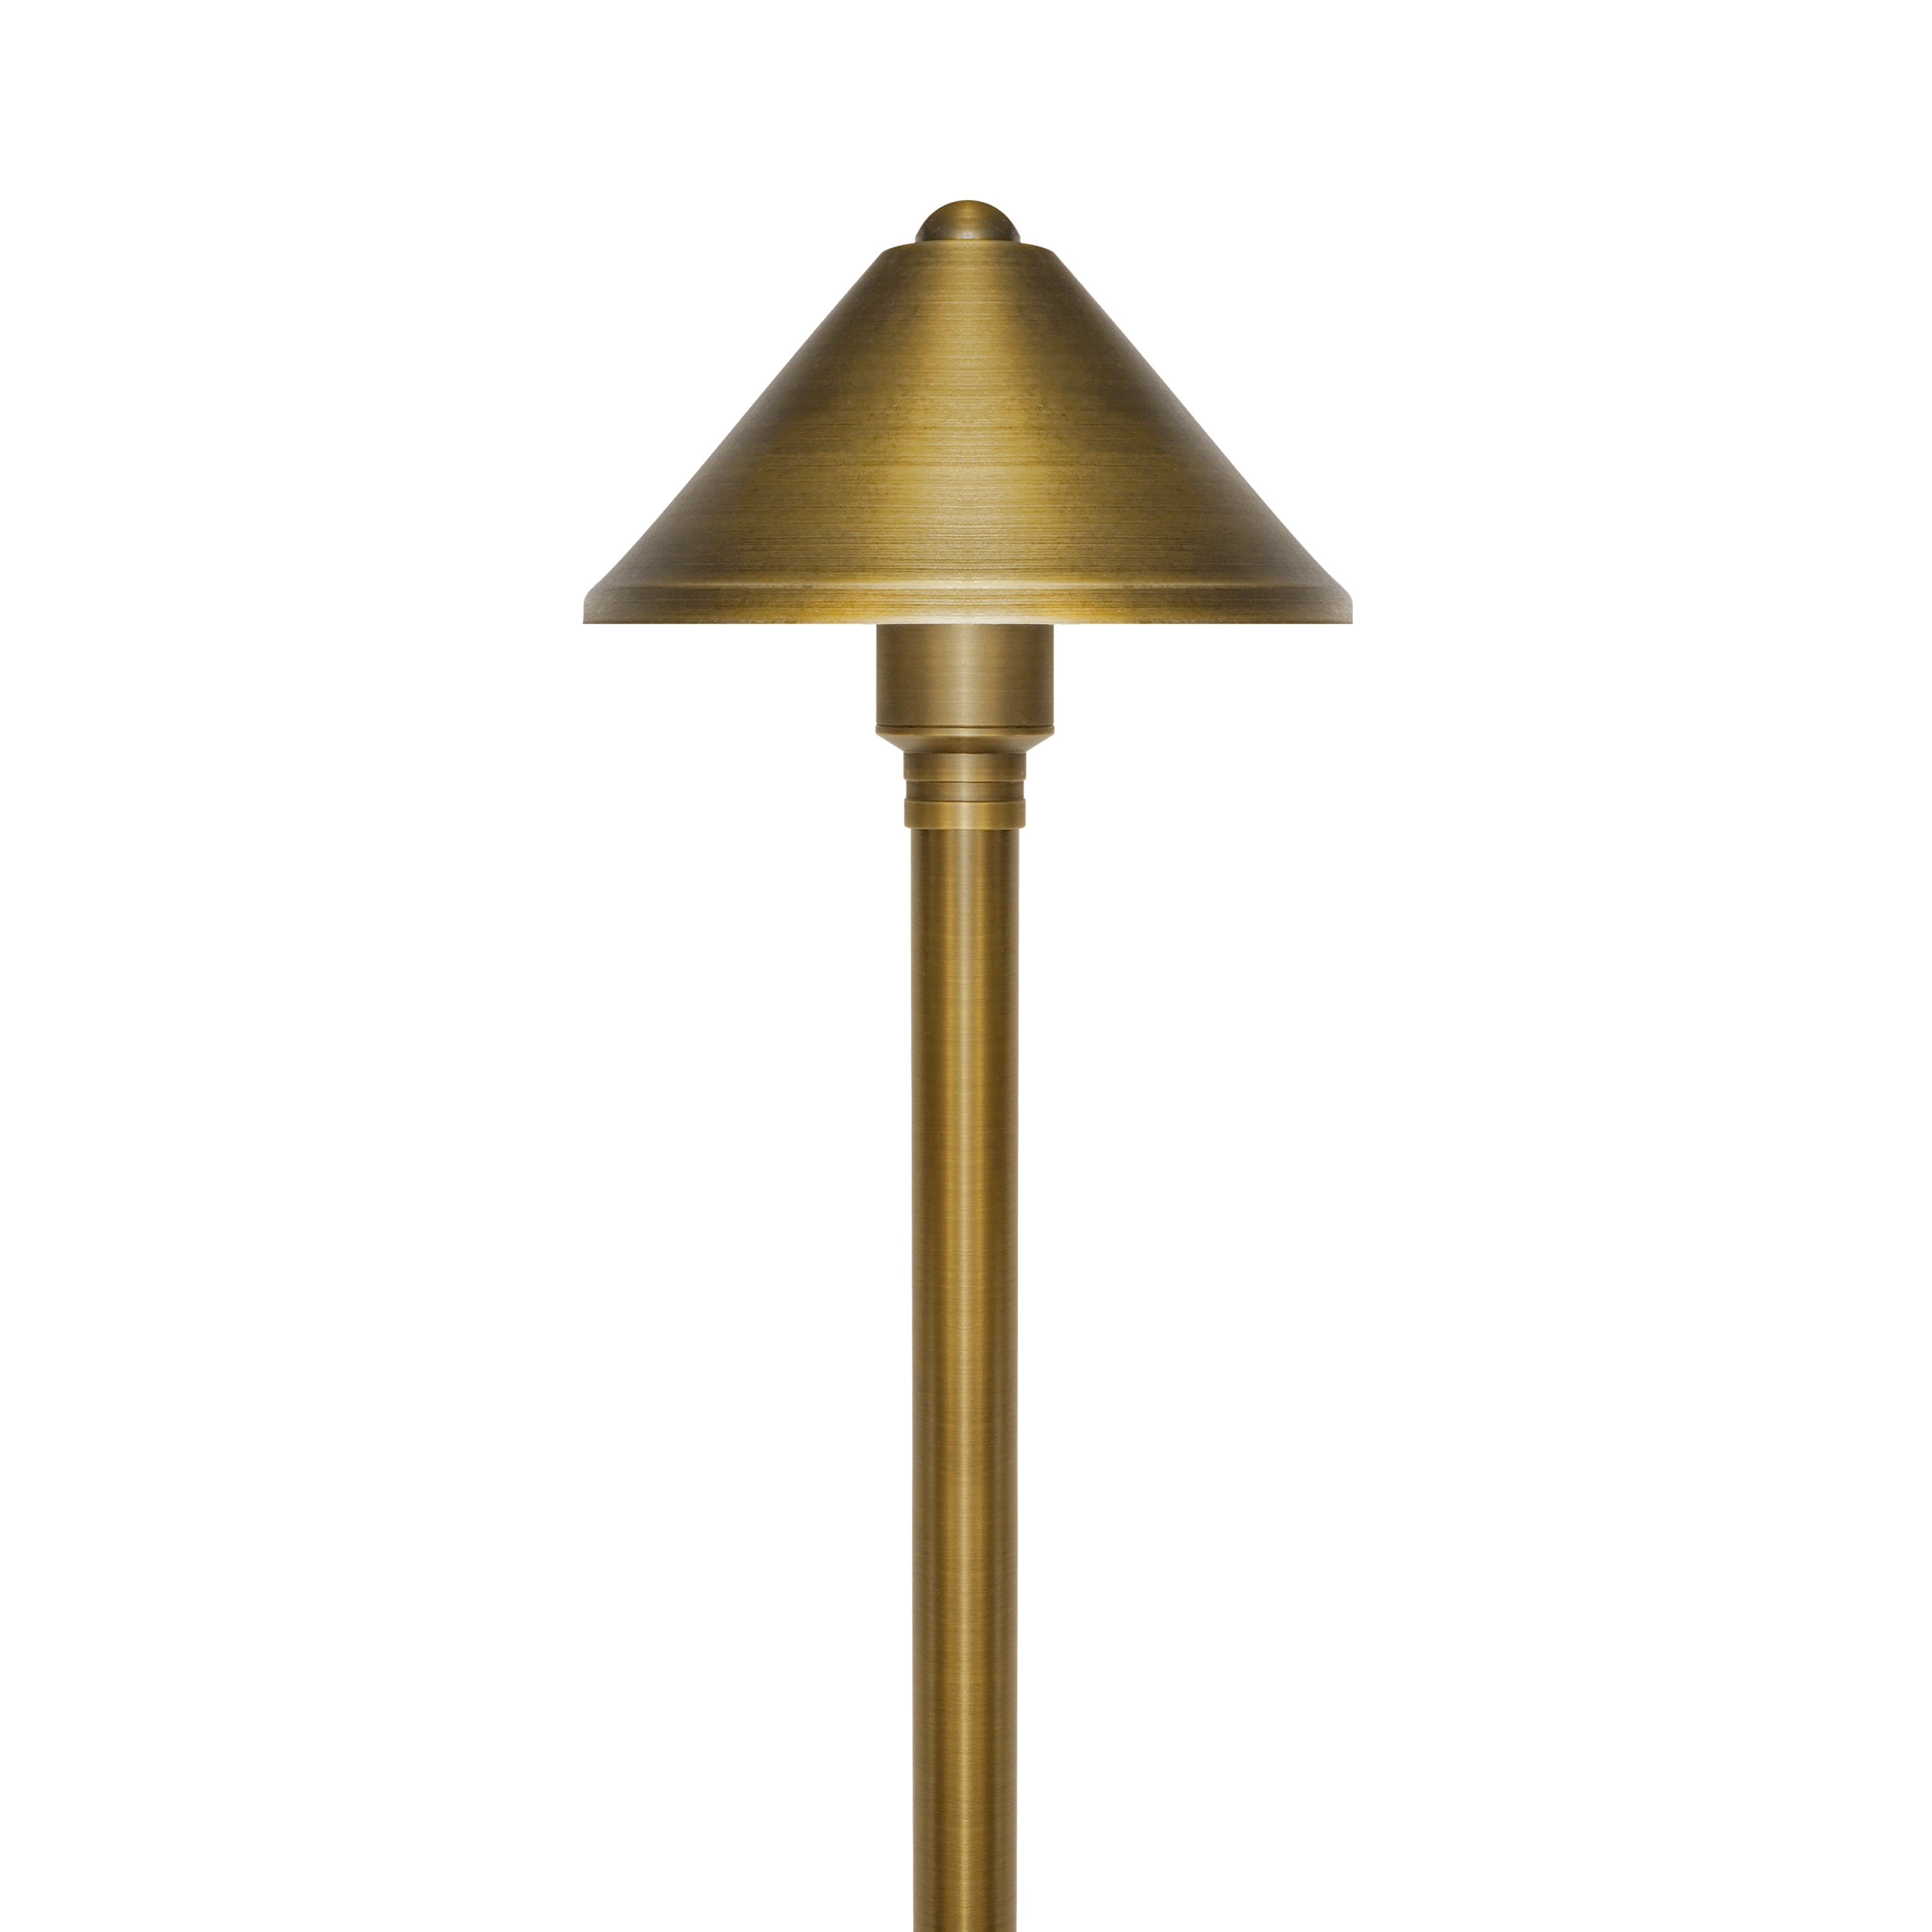 Low Voltage Solid Brass Conehead Path Light (5" Shade, 20" Tall), 3W, 12V AC/DC, IP65 Waterproof, 2700K